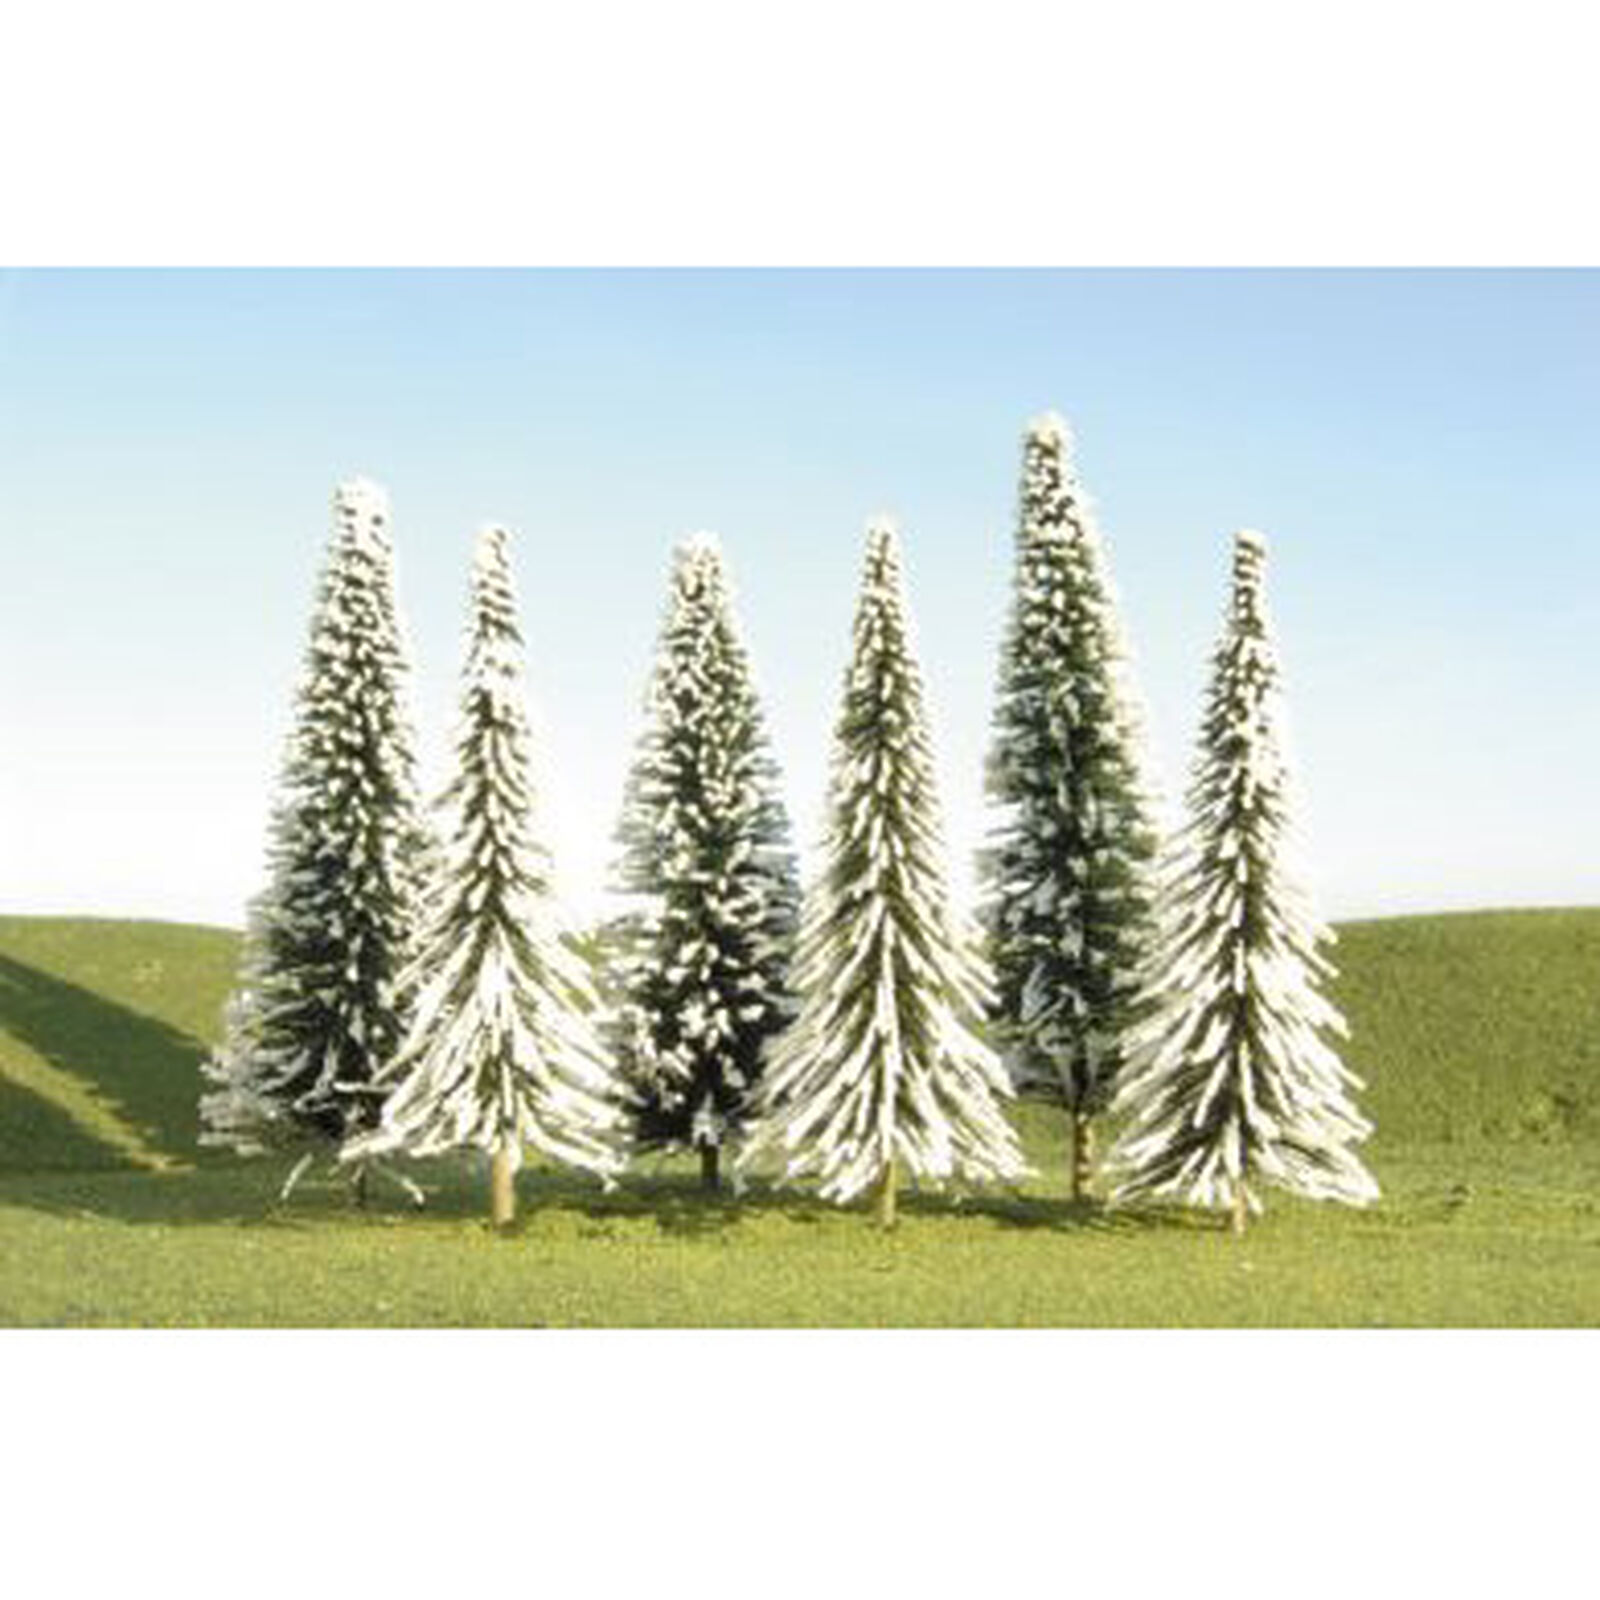 Scenescapes Pine Trees with Snow, 5-6" (24)